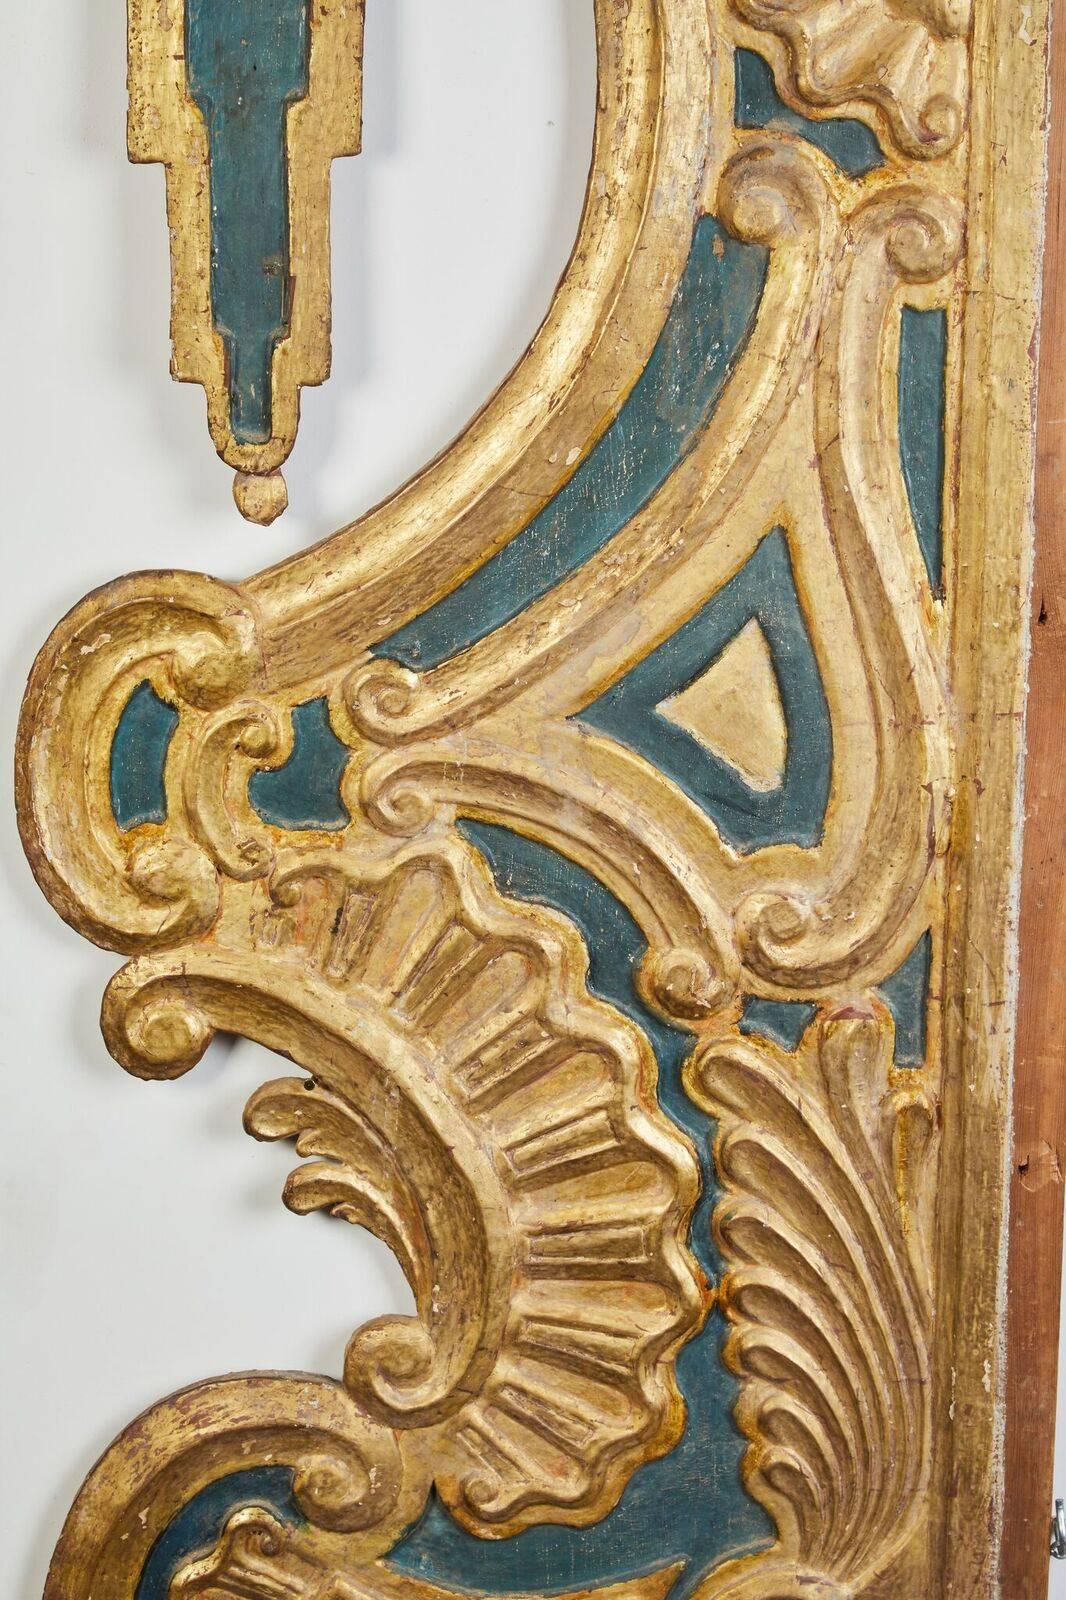 Pair of left and right, elaborately hand-carved, painted and gilded, undulating, wood door surrounds from a Venetian palazzo. The relief carving consists of scrolls, shell-like motifs and a pair of 